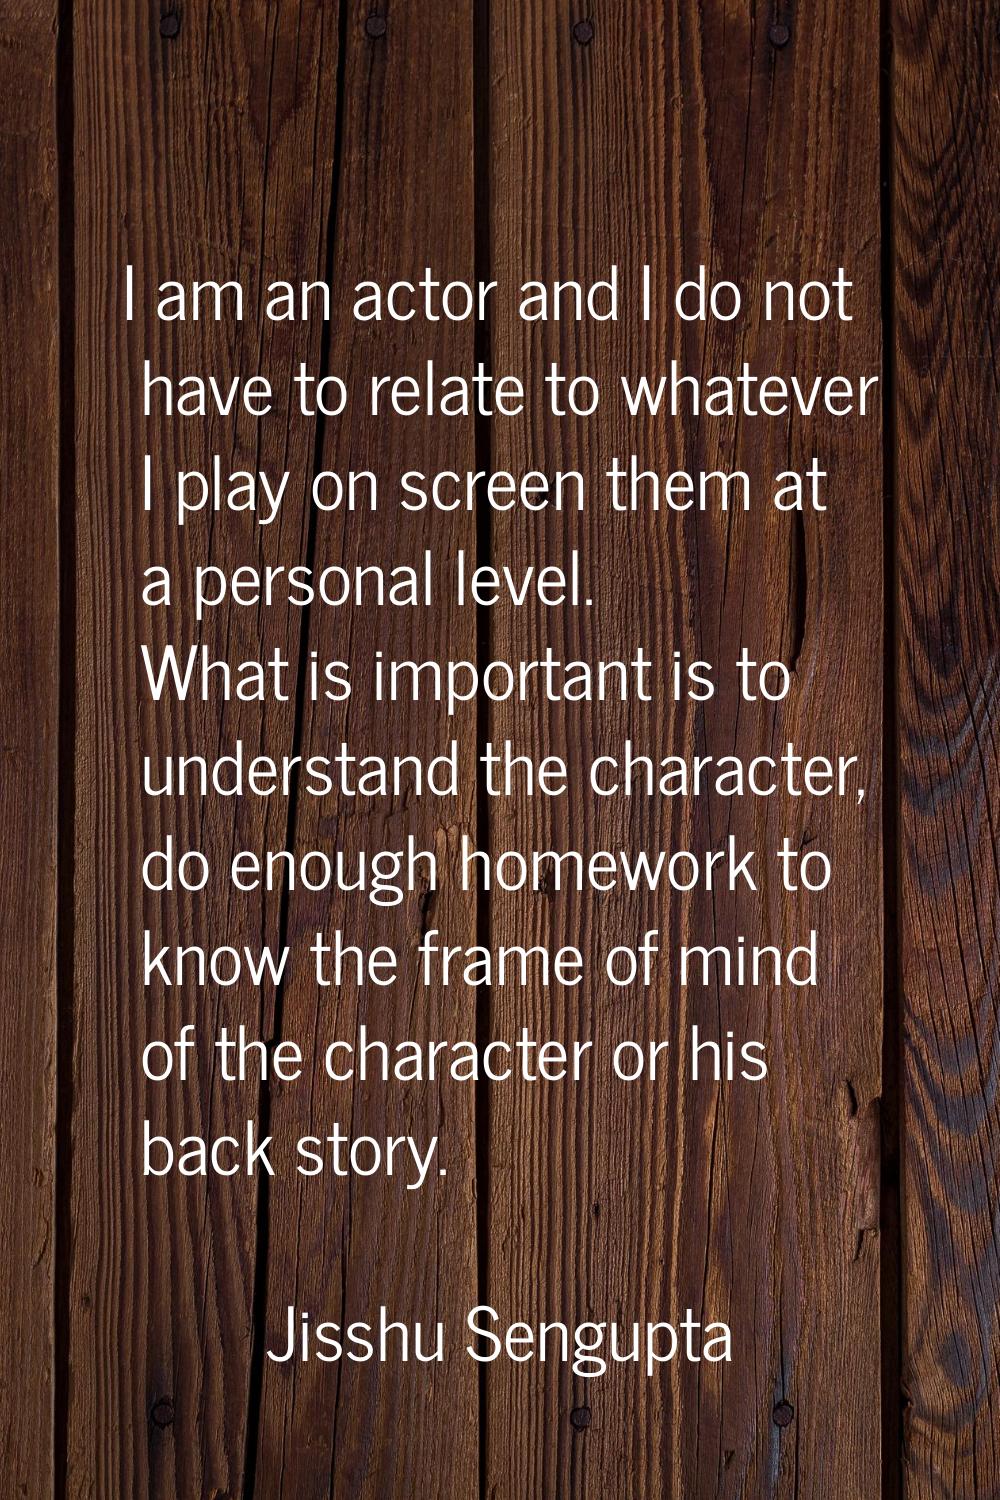 I am an actor and I do not have to relate to whatever I play on screen them at a personal level. Wh